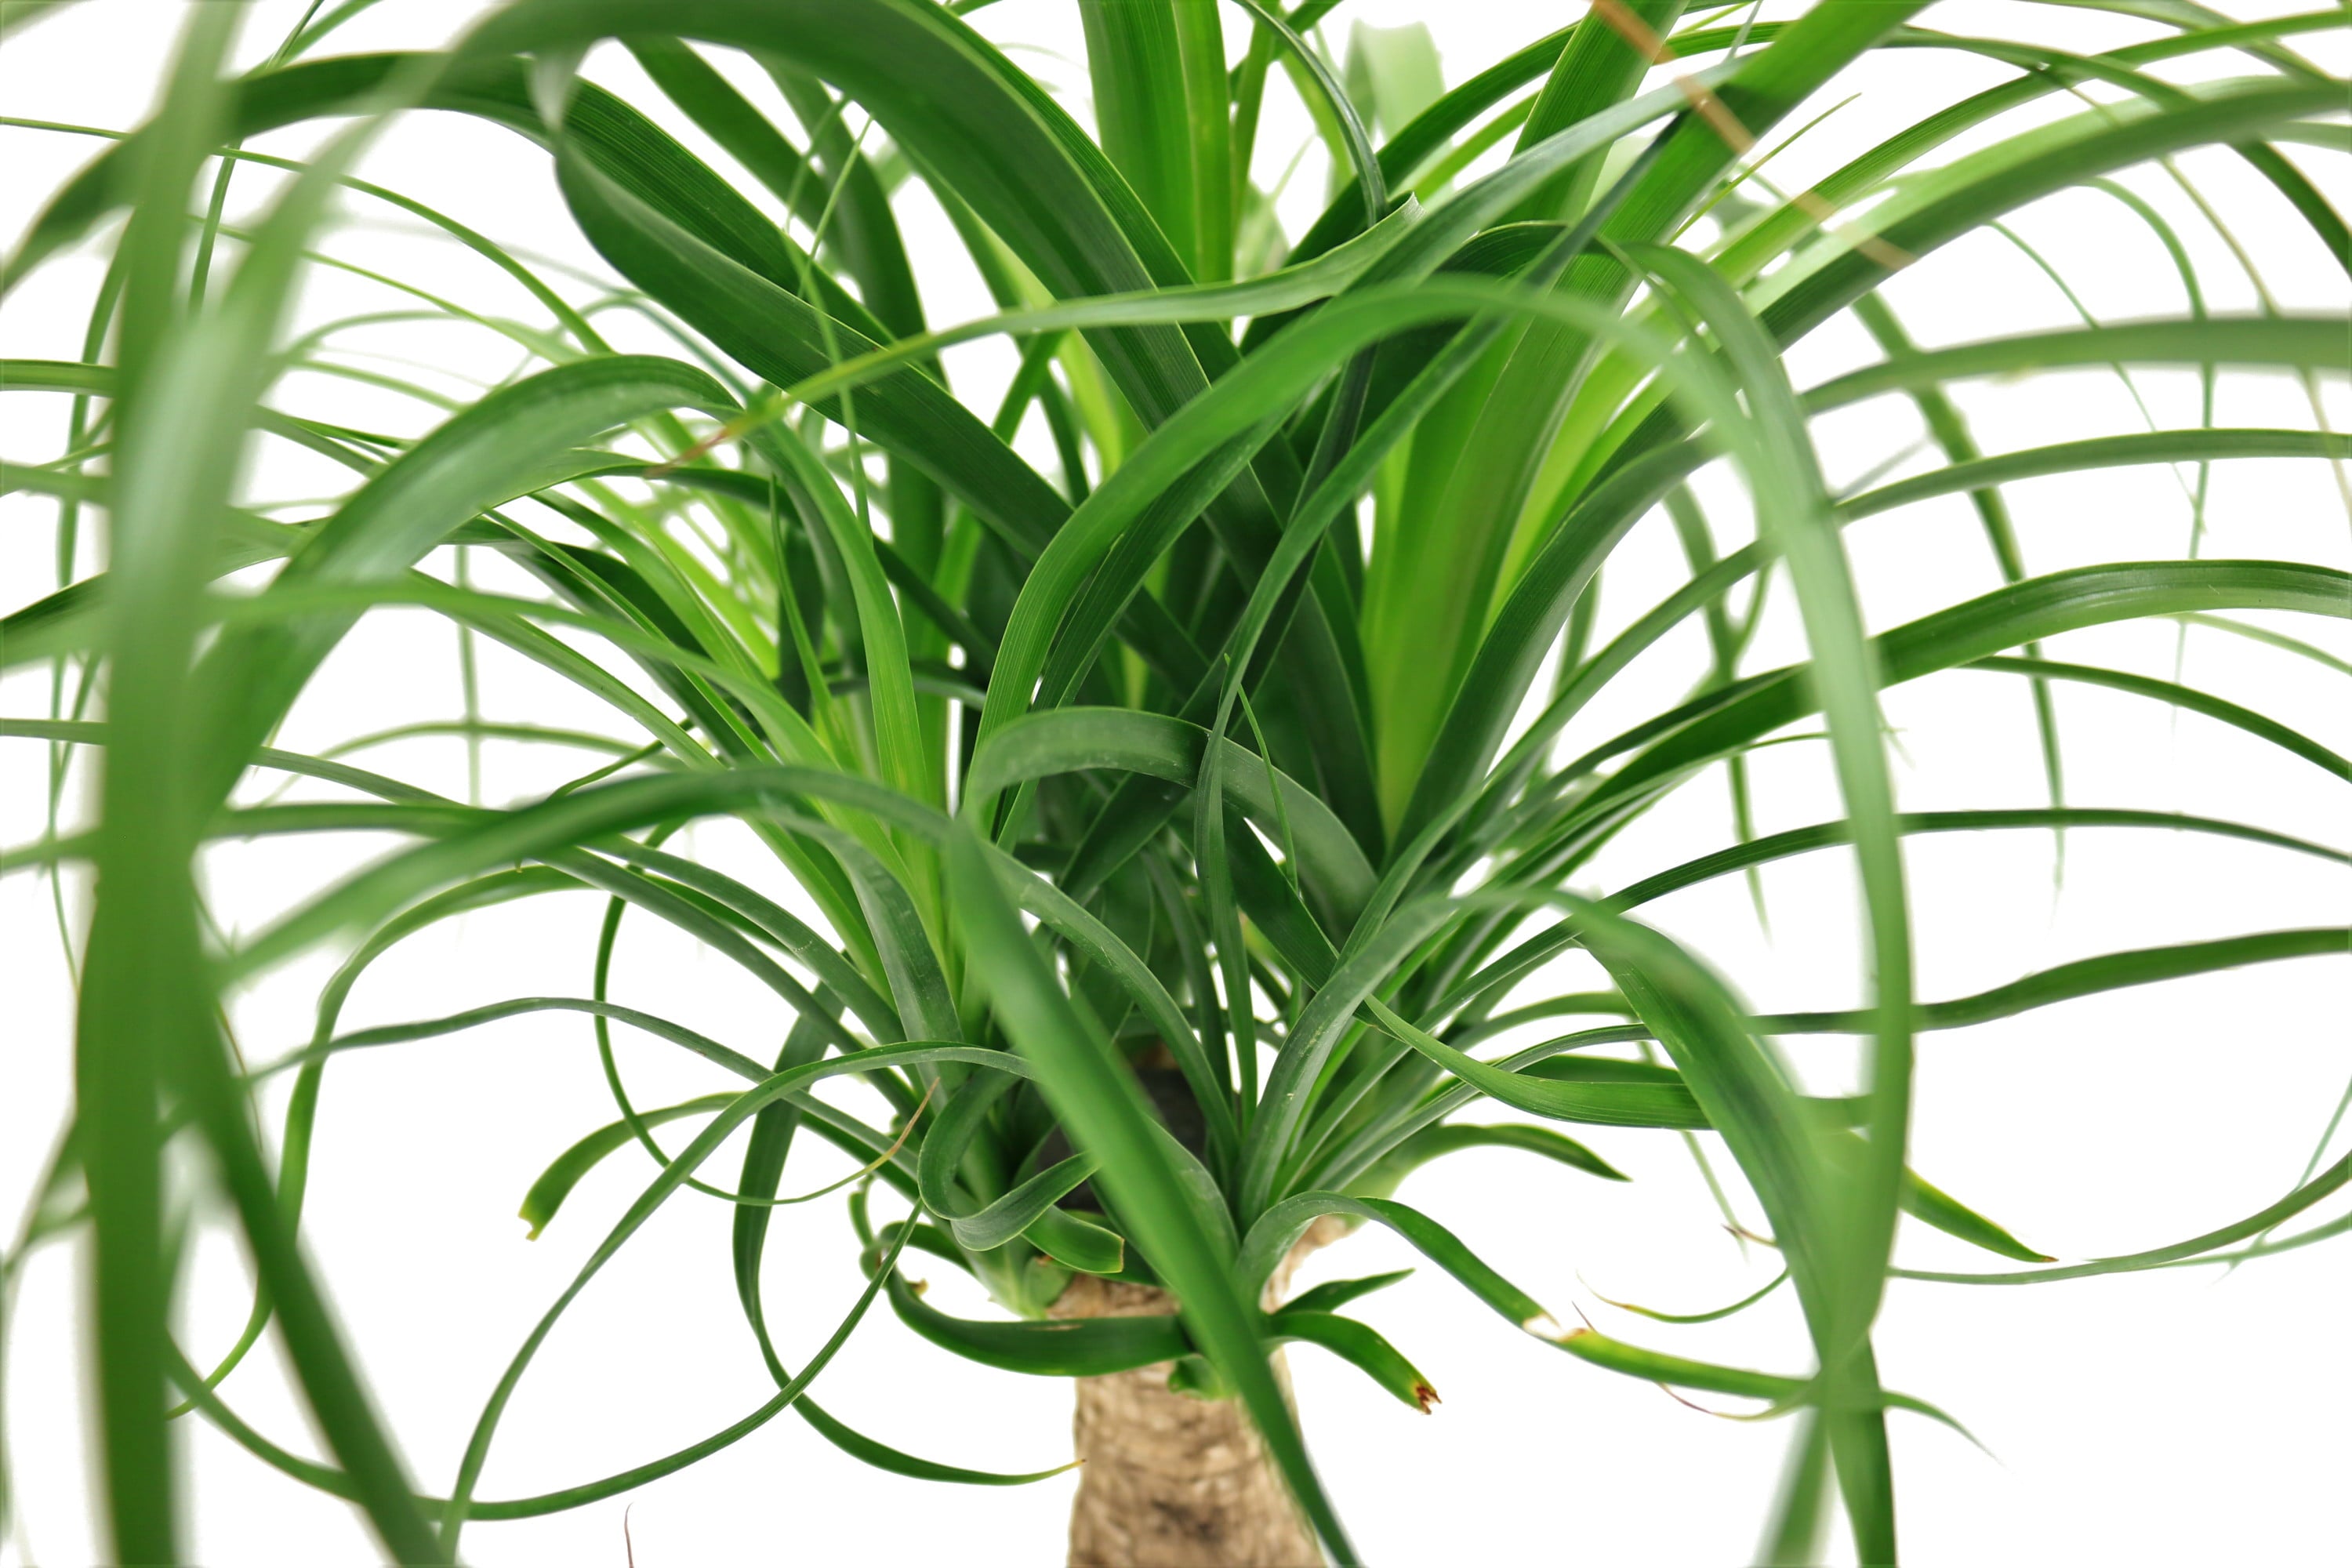 Costa Farms  Live Indoor 15in. Tall Green Ponytail Palm; Medium， Indirect Light Plant in 6in. Grower Pot